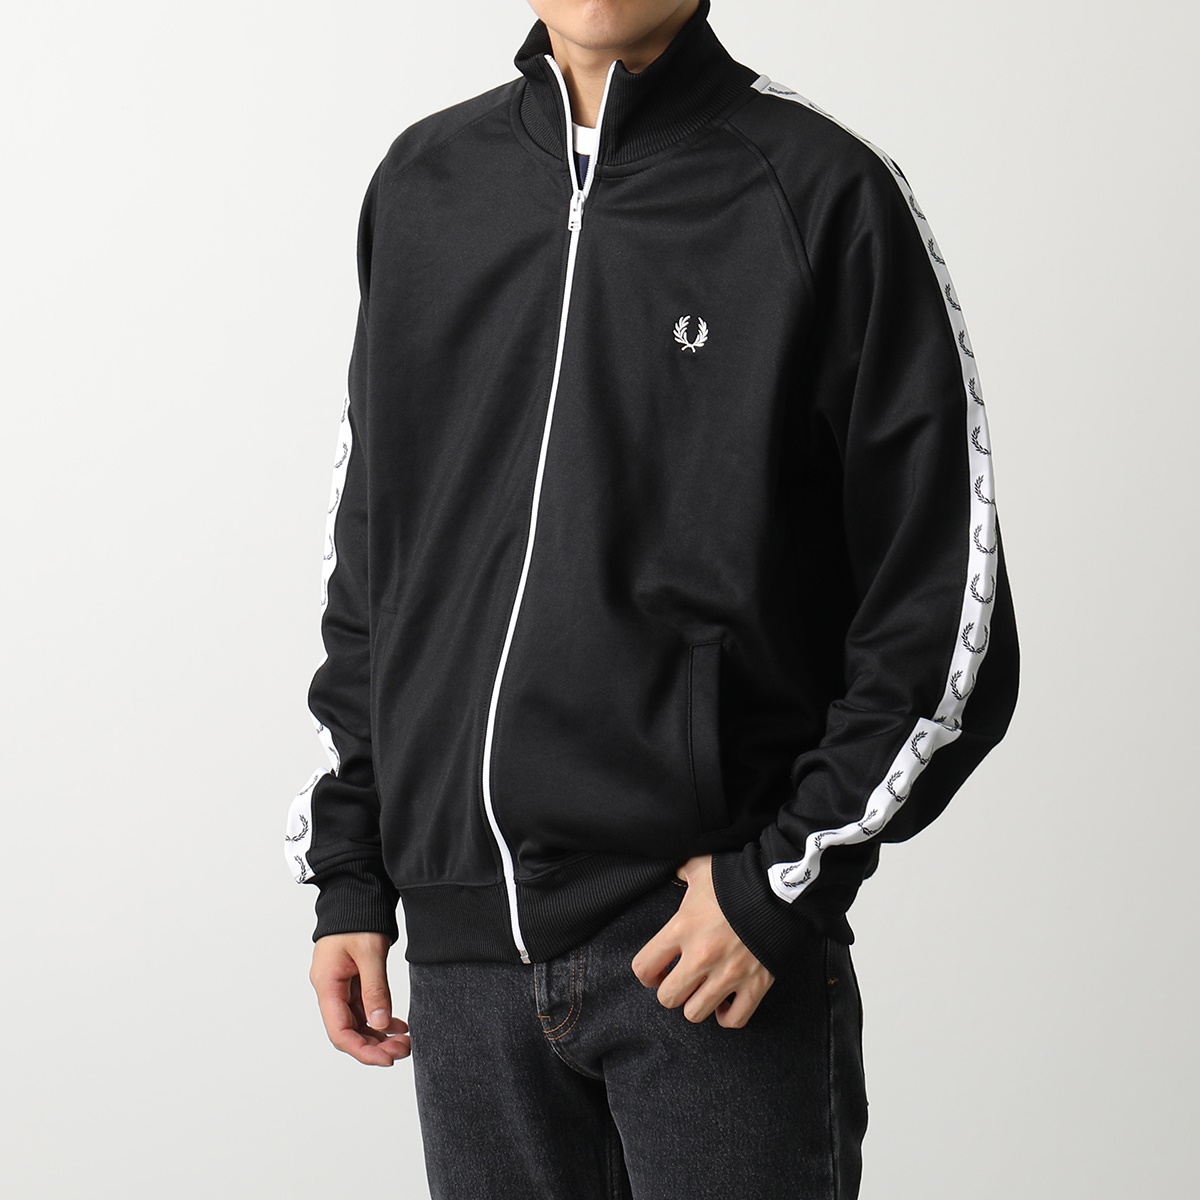 FRED PERRY トラックジャケット TAPED TRACK JACKET J4620 メンズ ...